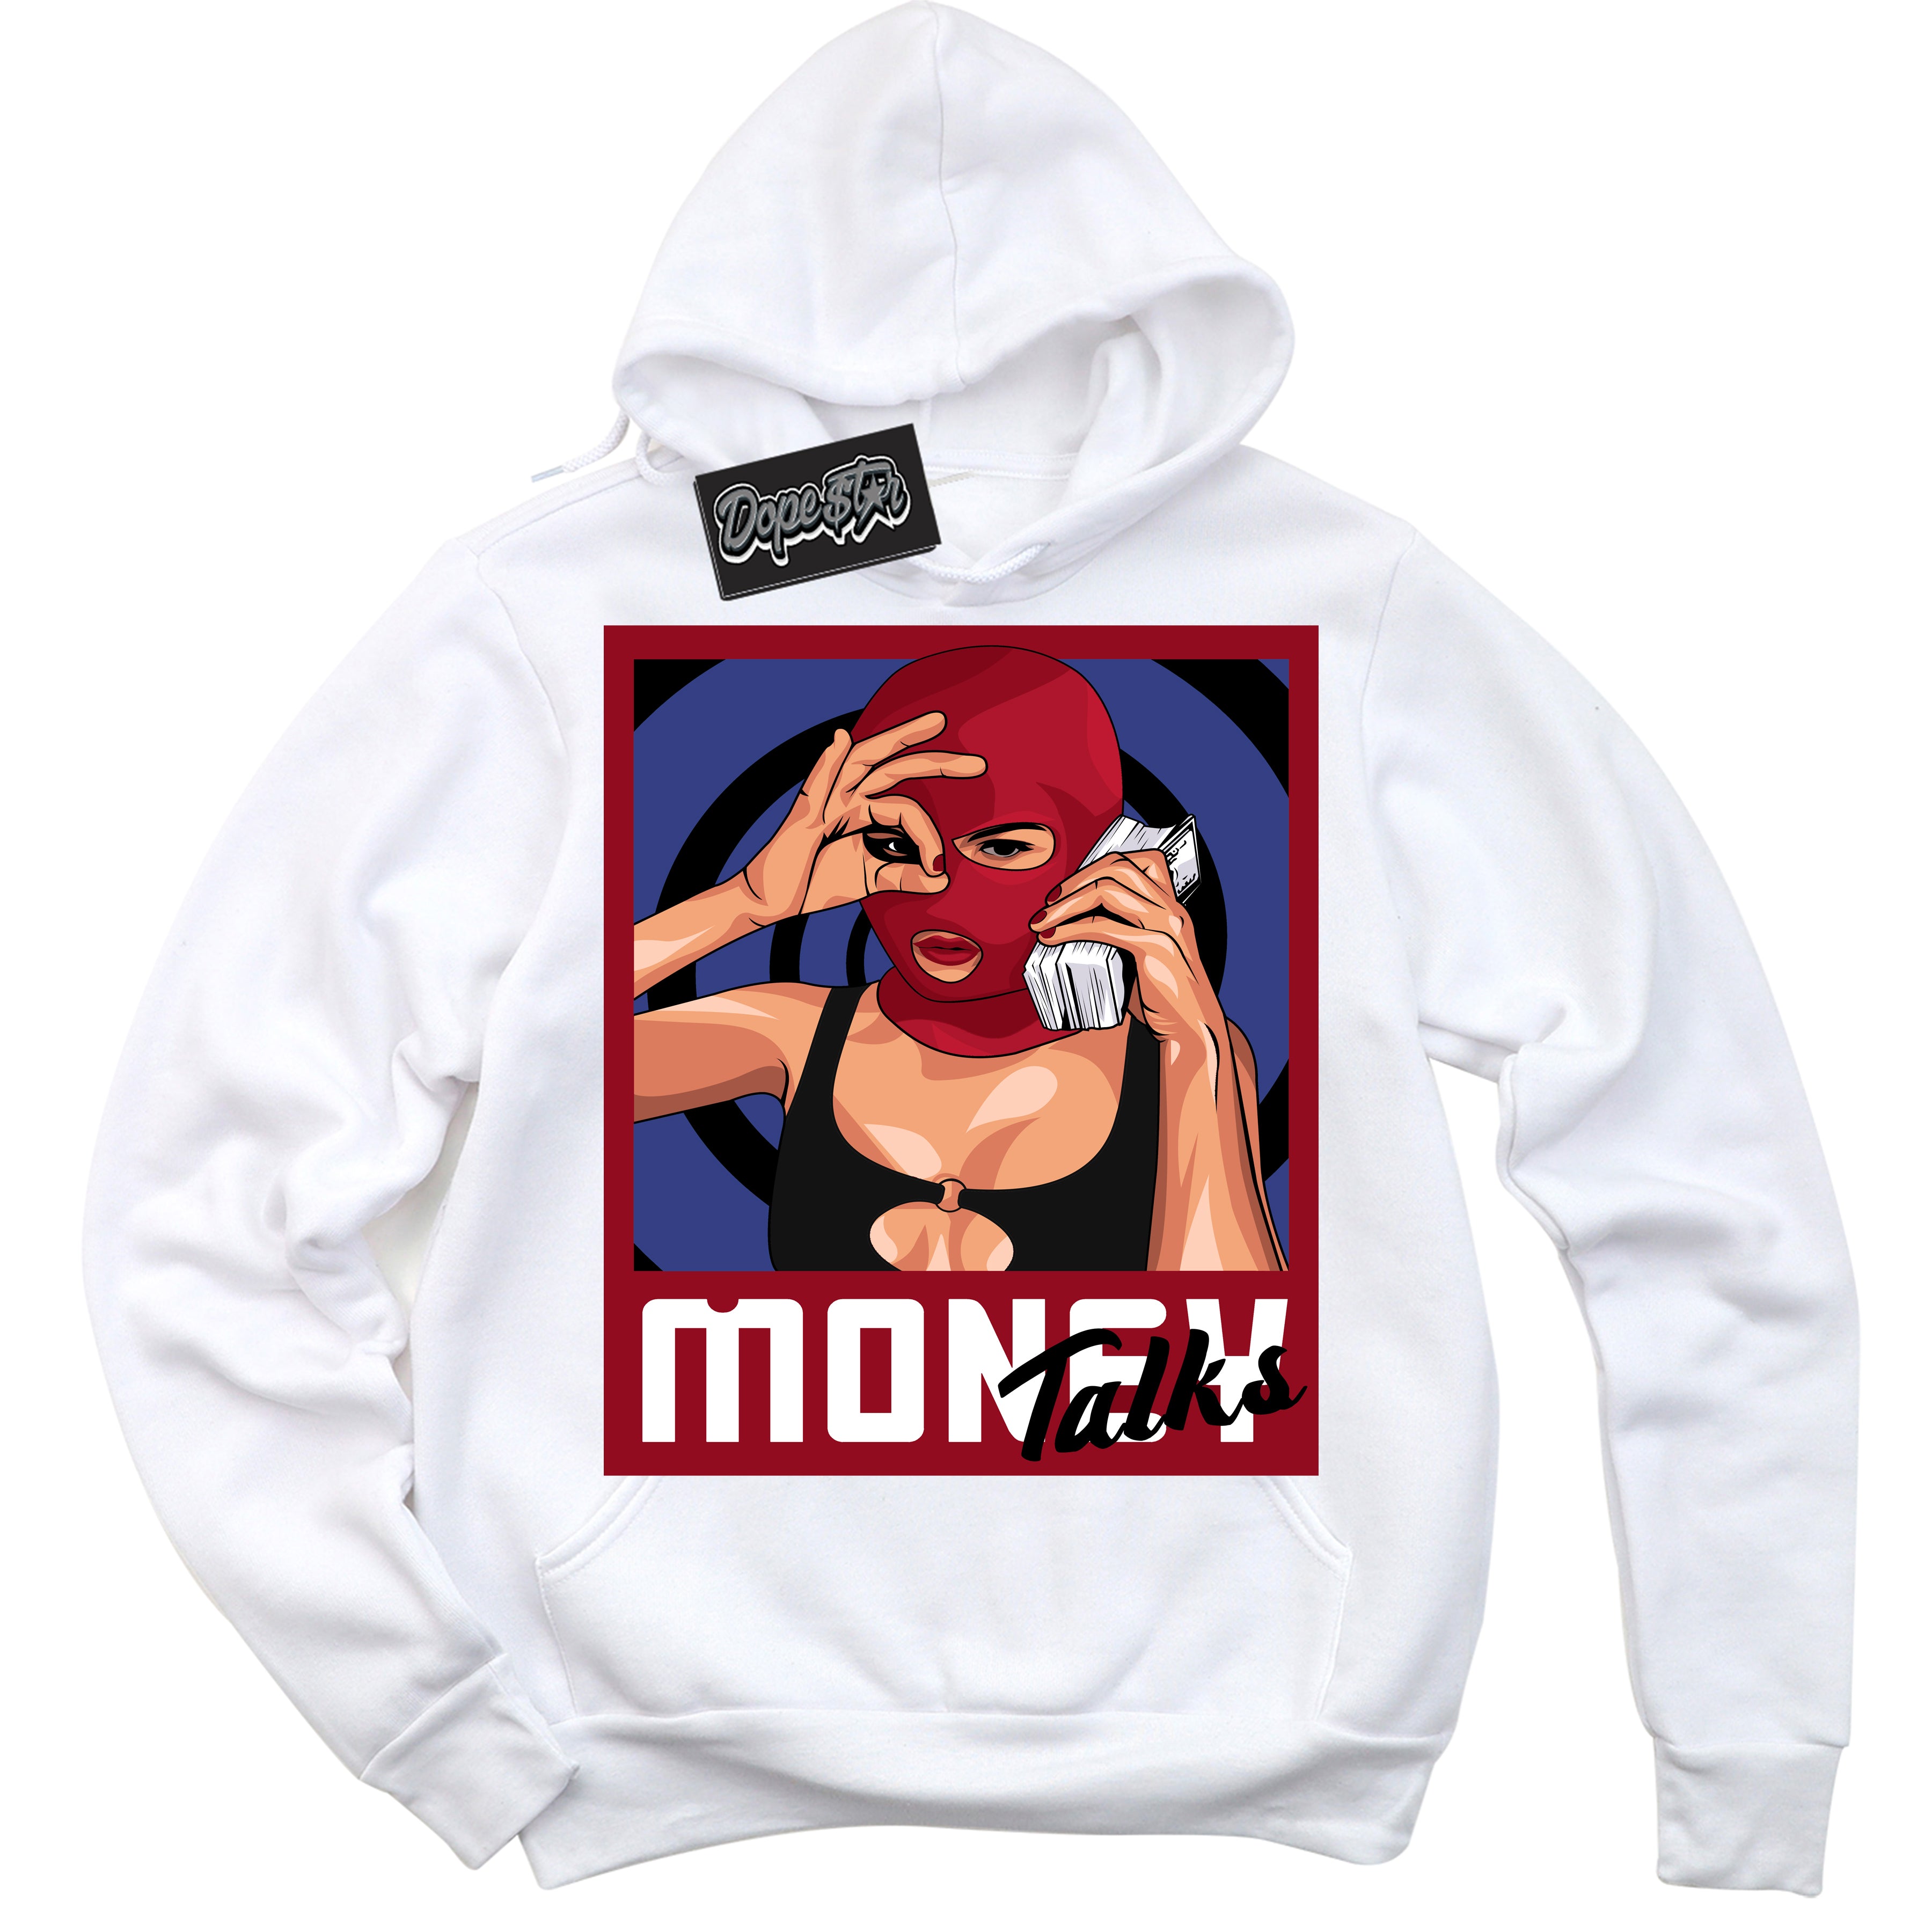 Cool White Hoodie with “ Money Talks ”  design that Perfectly Matches Playoffs 8s Sneakers.